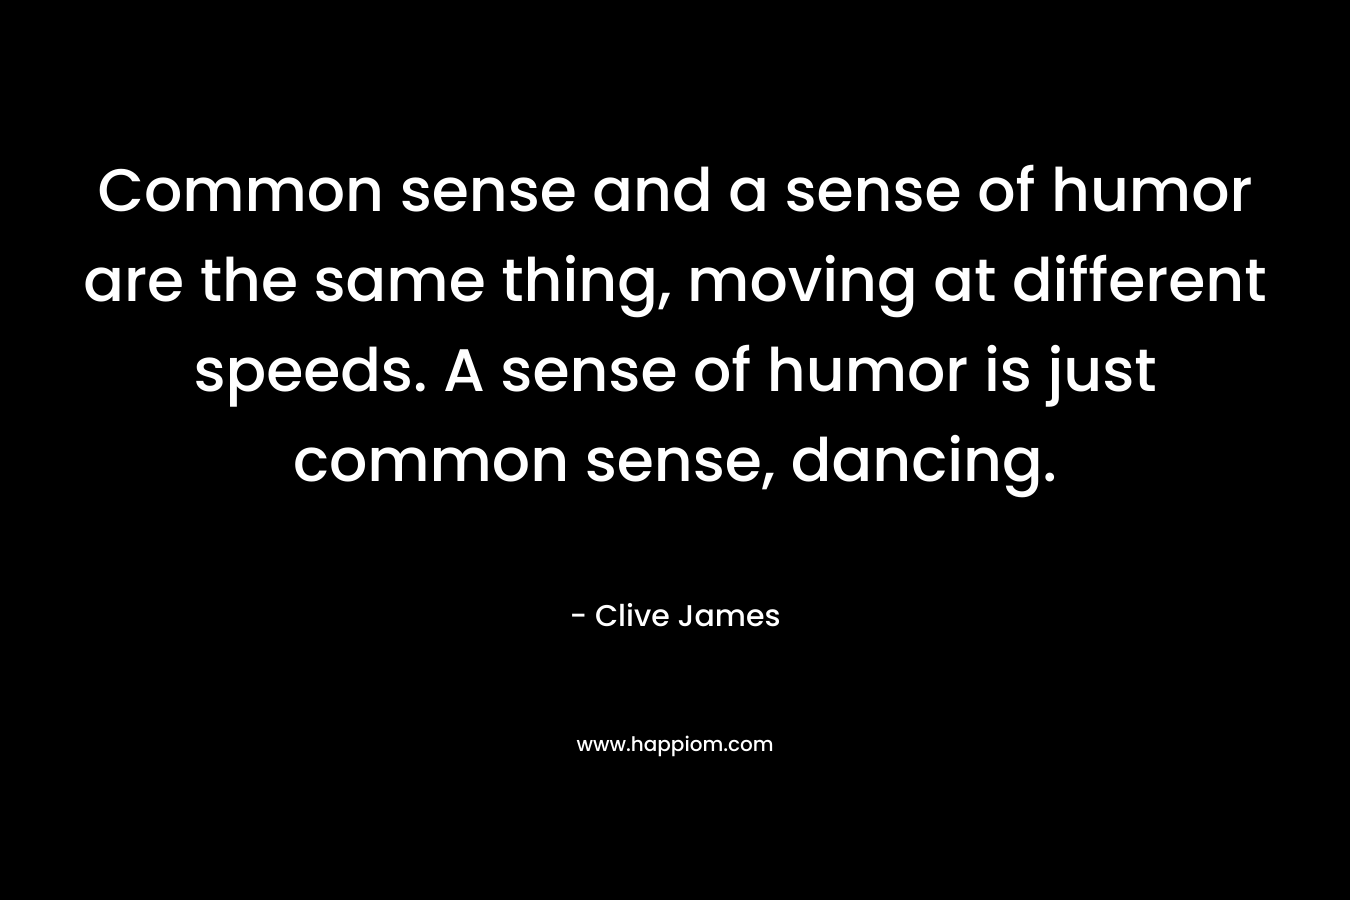 Common sense and a sense of humor are the same thing, moving at different speeds. A sense of humor is just common sense, dancing.